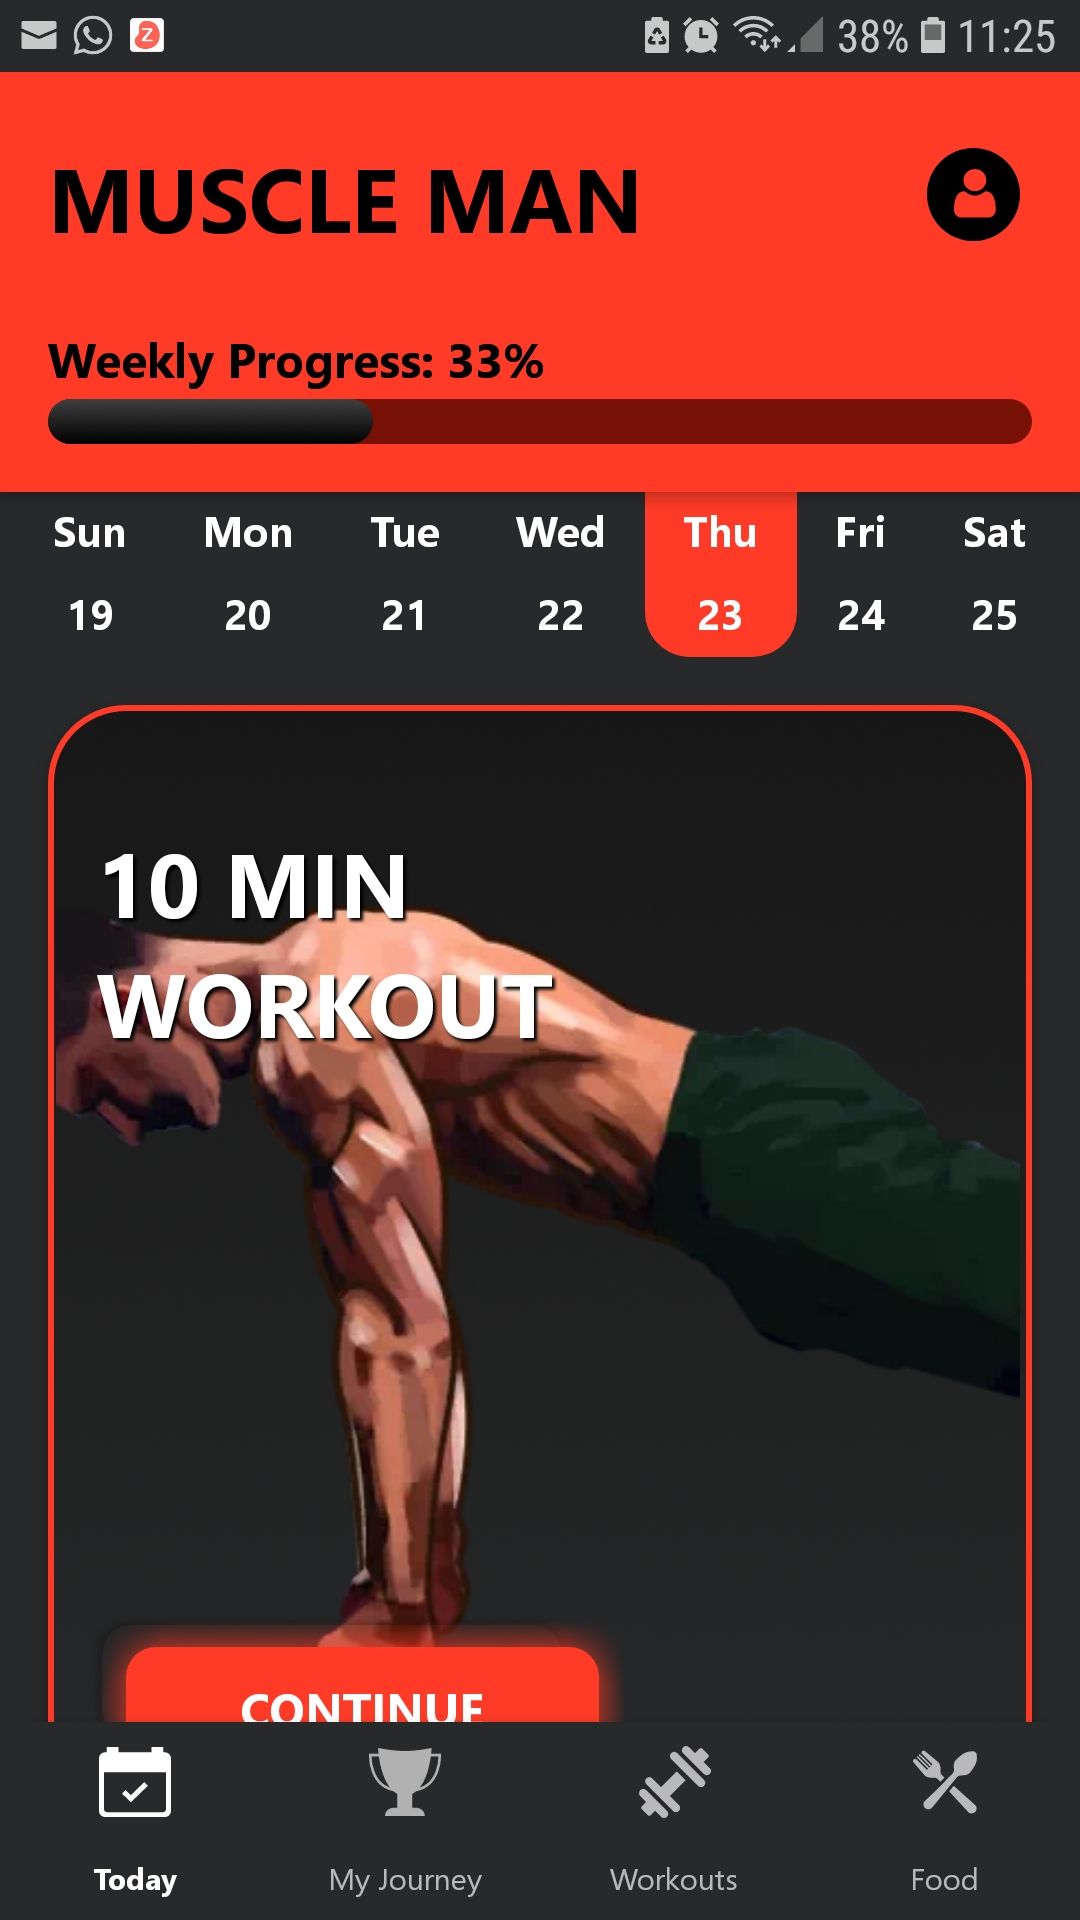 Muscle Man mobile exercise app weekly progress